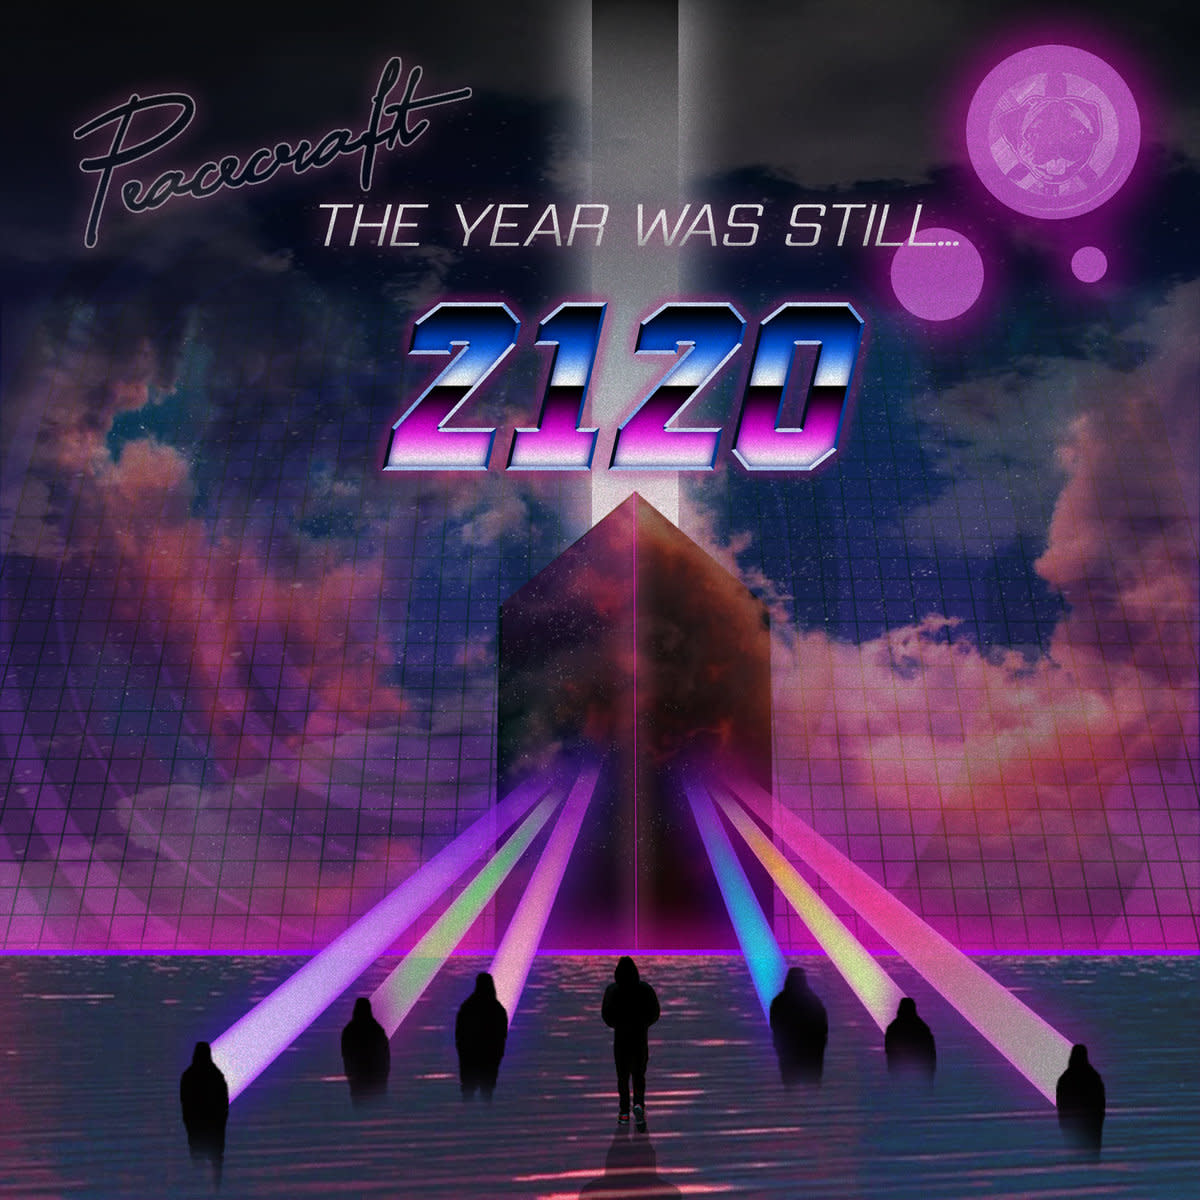 Review: "The Year Was Still 2120" by Peacecraft (and Guests)